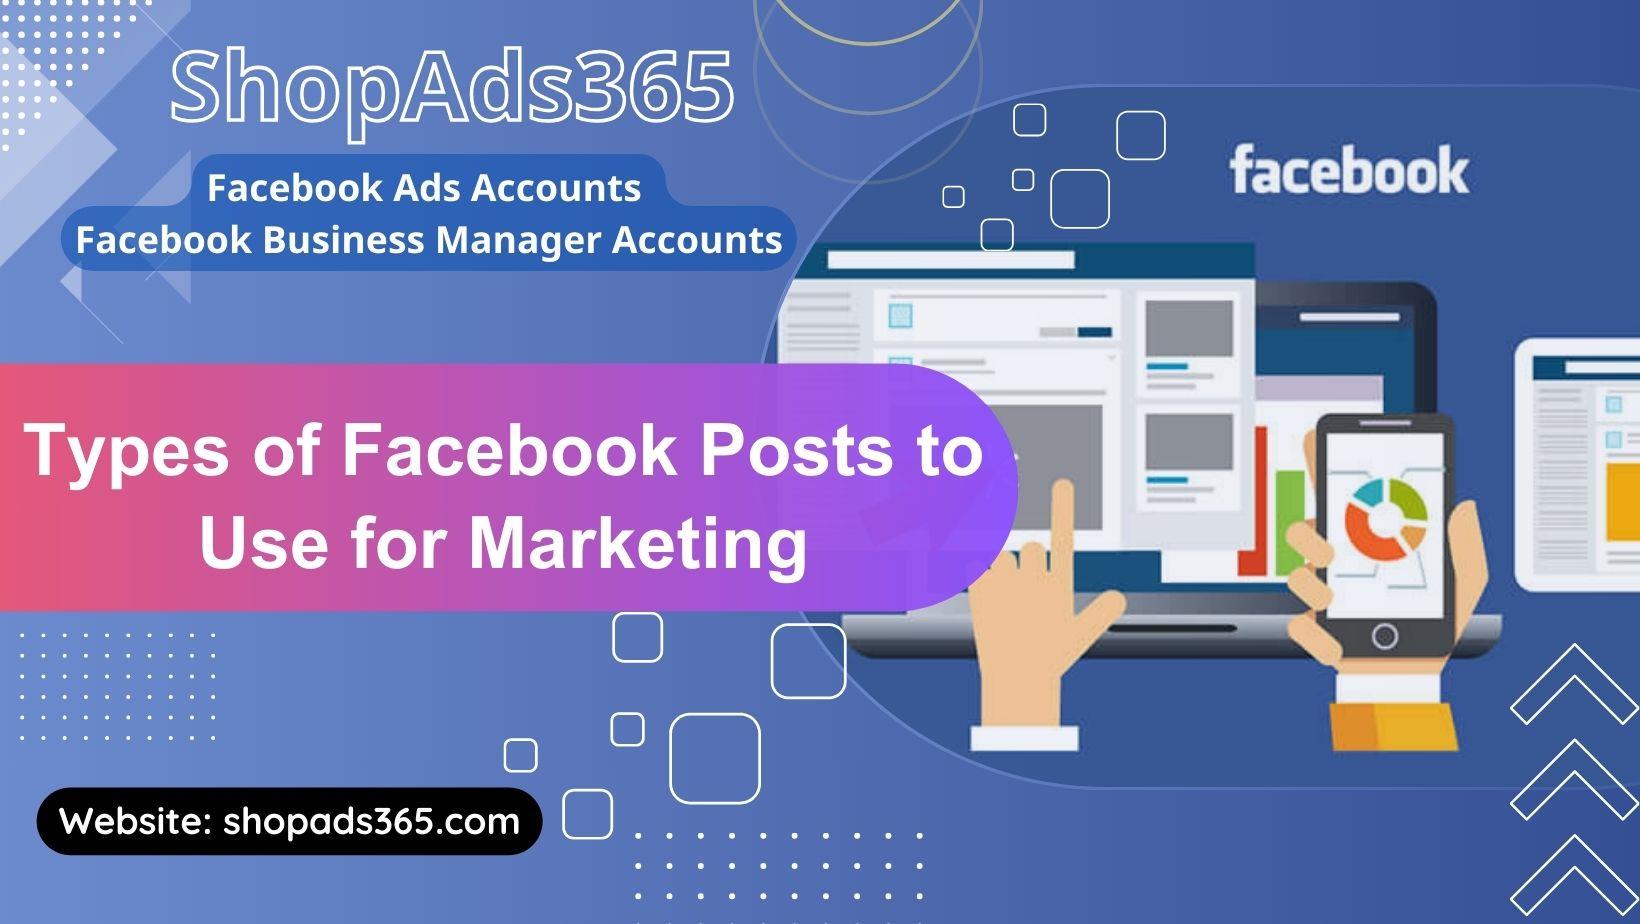 Types of Facebook Posts for Marketing